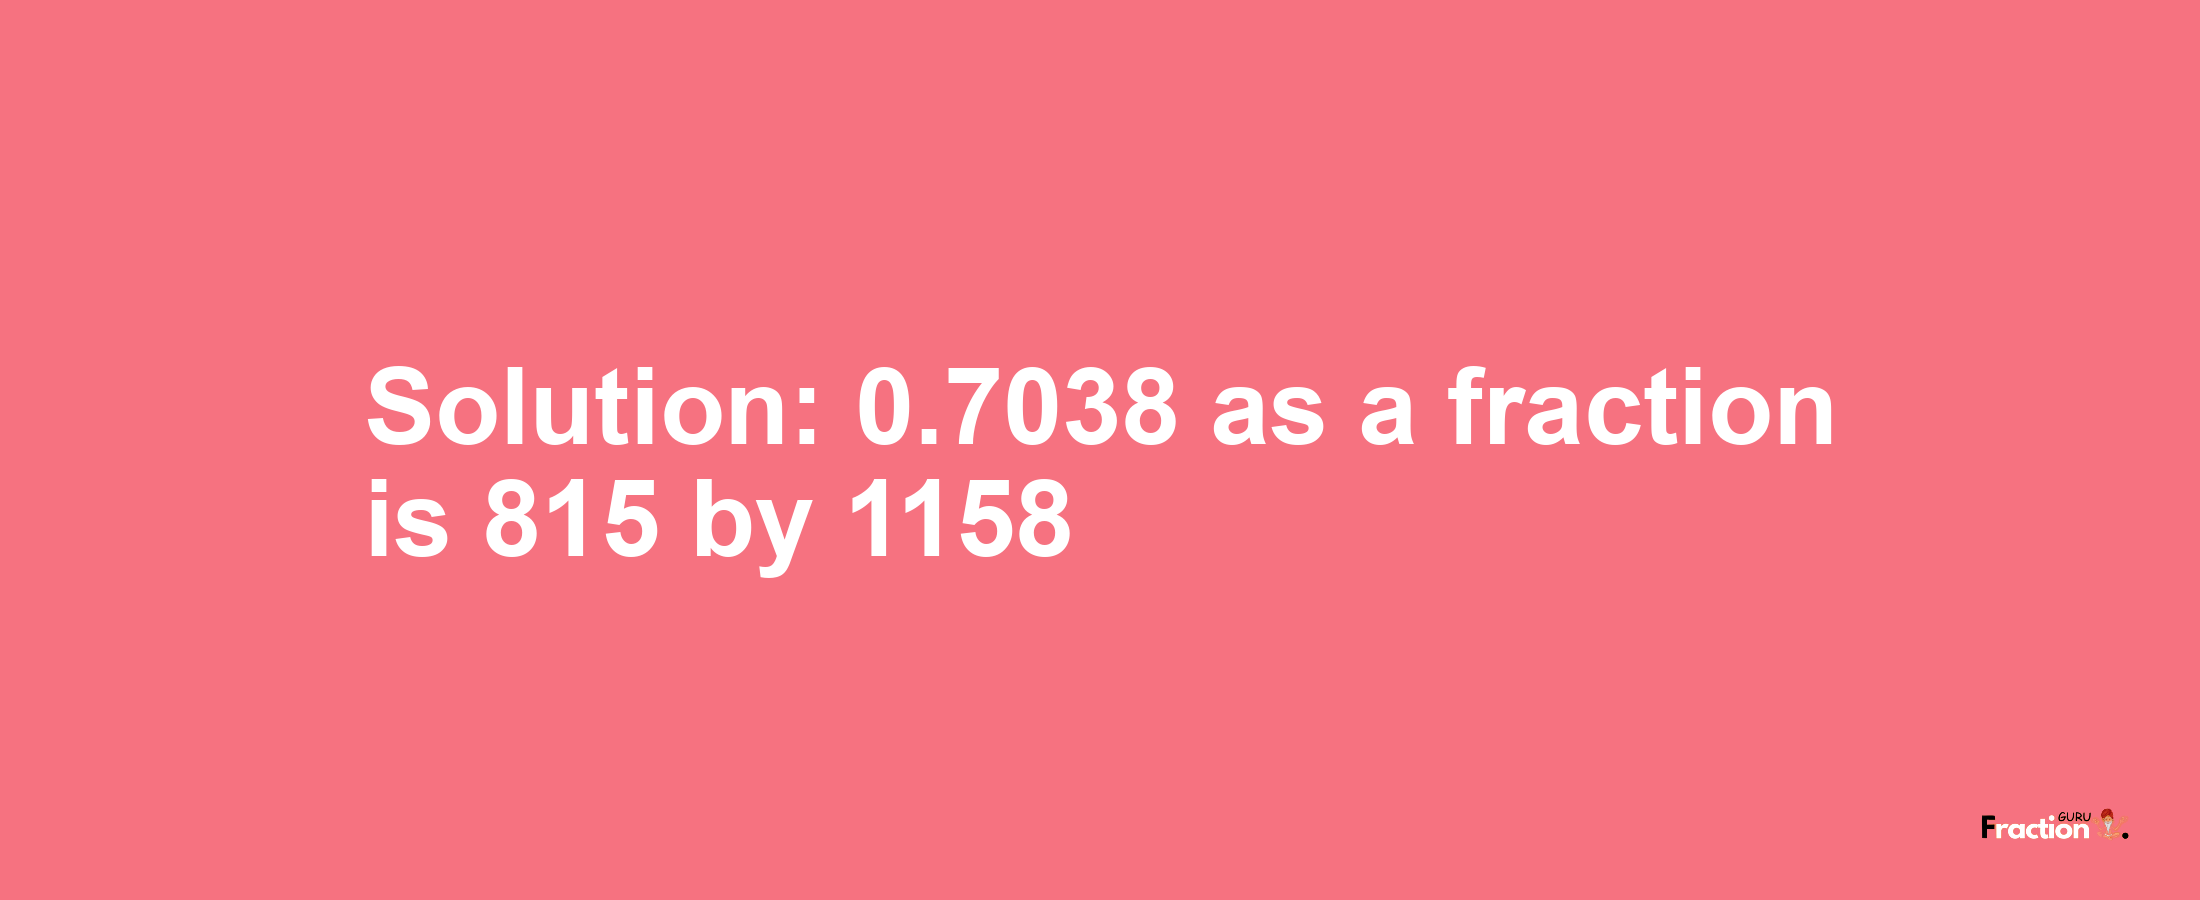 Solution:0.7038 as a fraction is 815/1158